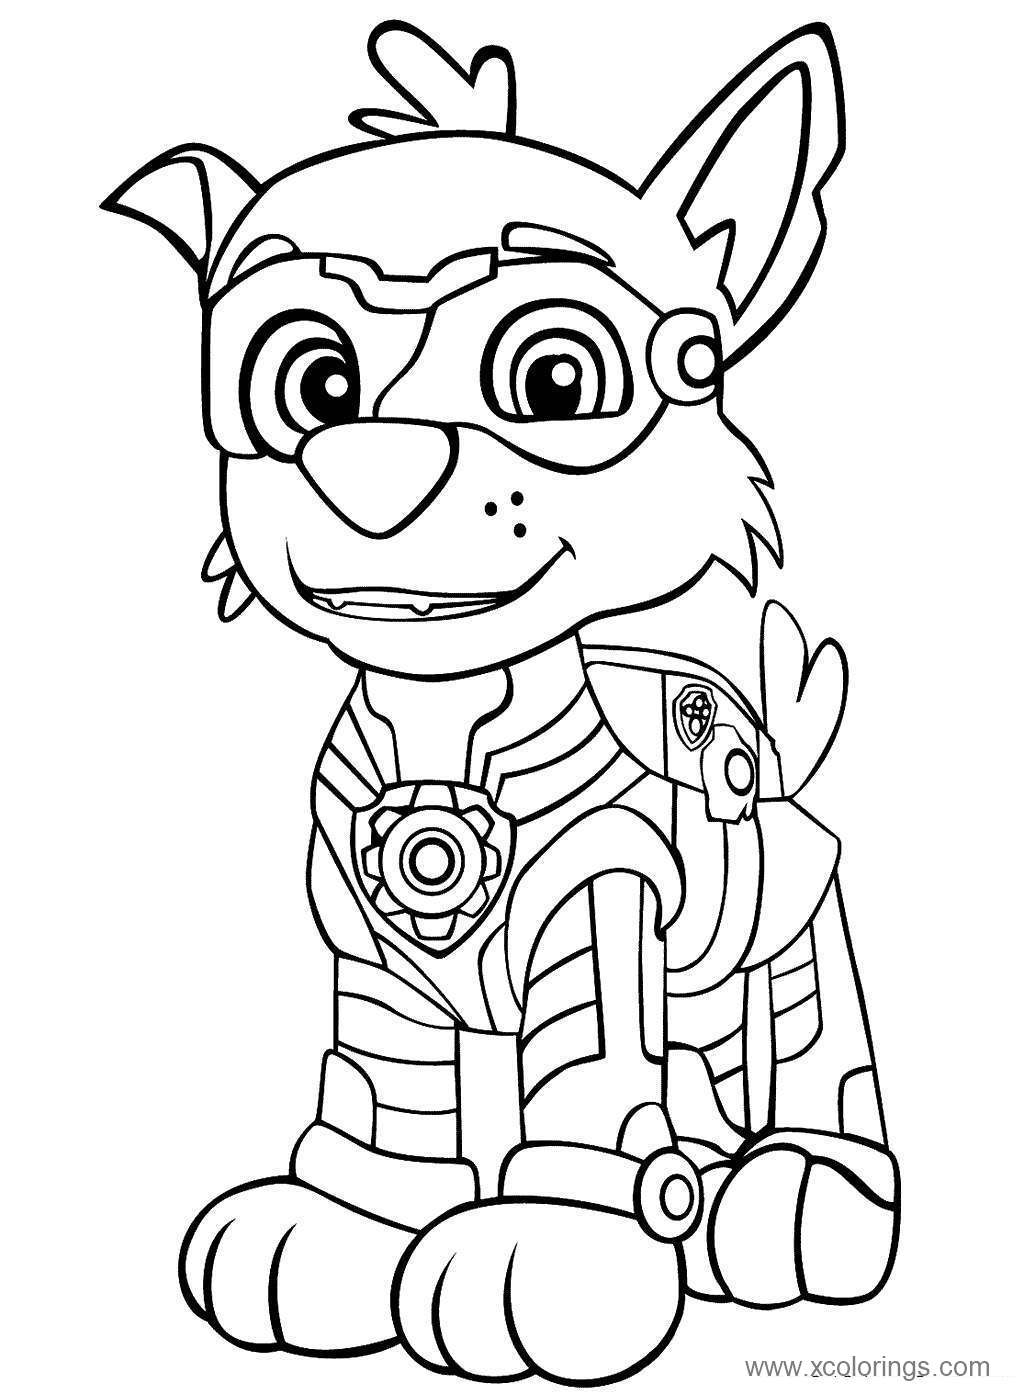 Paw Patrol Coloring Pages FREE Printable 148